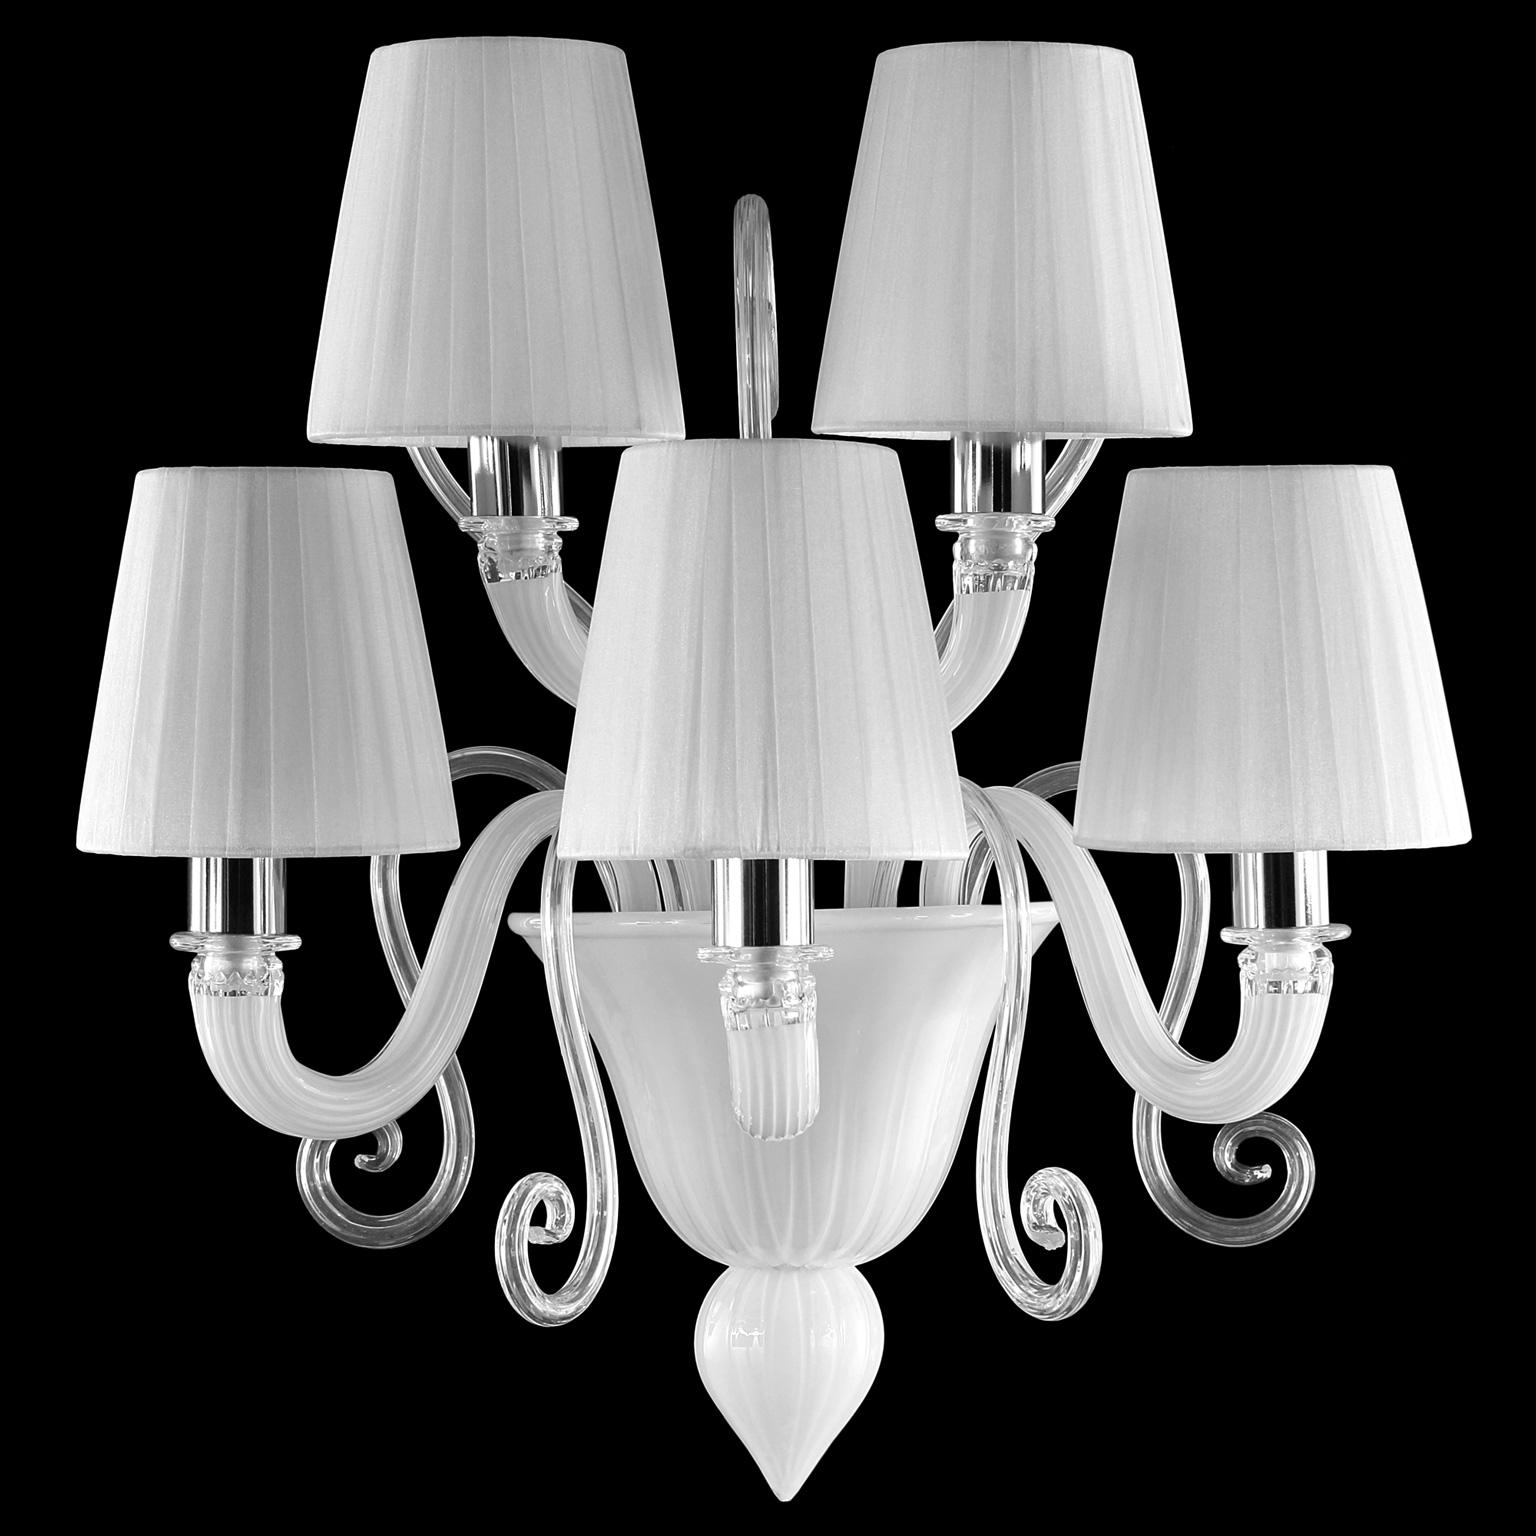 Gatsby wall 5-light, white encased Murano glass. 'Reversed' decorative curl elements. White handmade organza plissé lampshades
The collection Gatsby is the perfect combination of elegant and modern elements. The use of colour featuring bright tones,